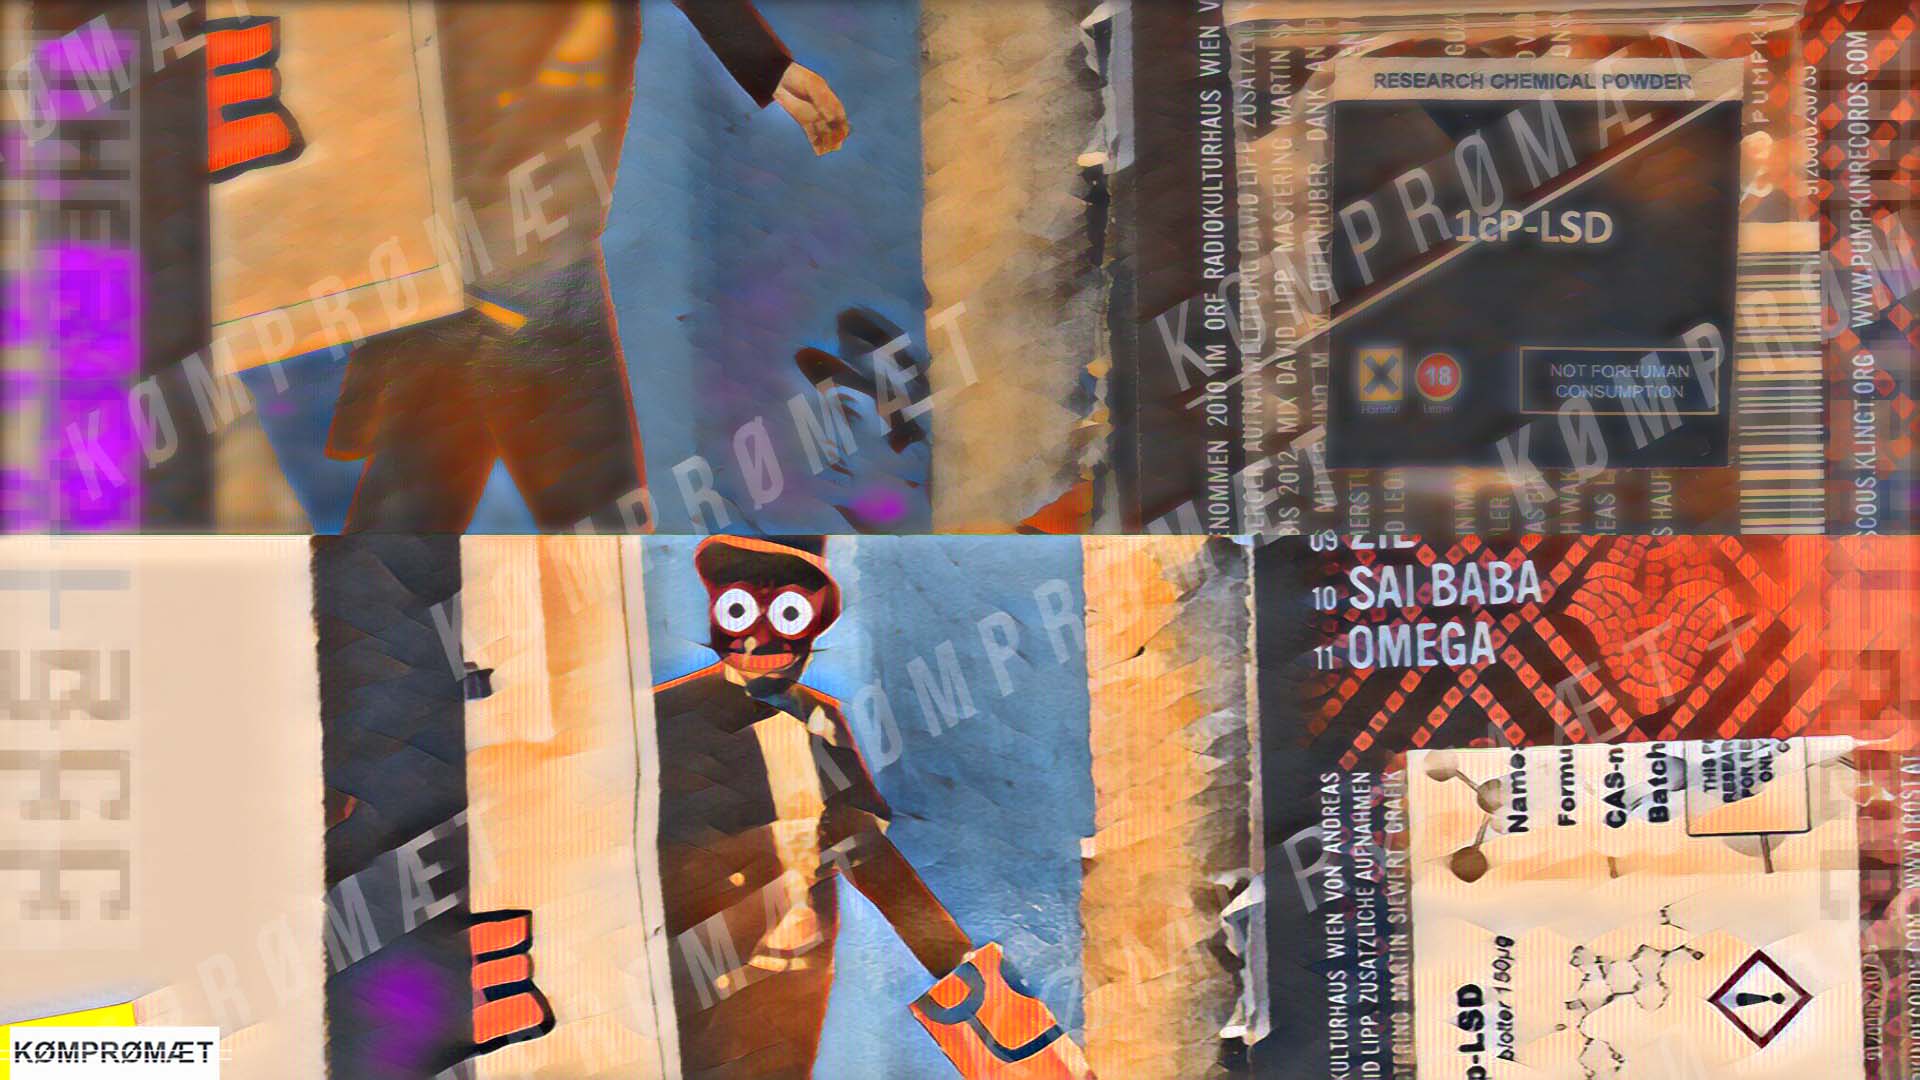 taser image for a shop review about The Real RC (Netherlands). A slightly distorted montage showing the Lysergamides 1P-LSD & 1cP-LSD in the form of blotters (a tiny piece of cardboard with liquid on it) on a colorful CD cover